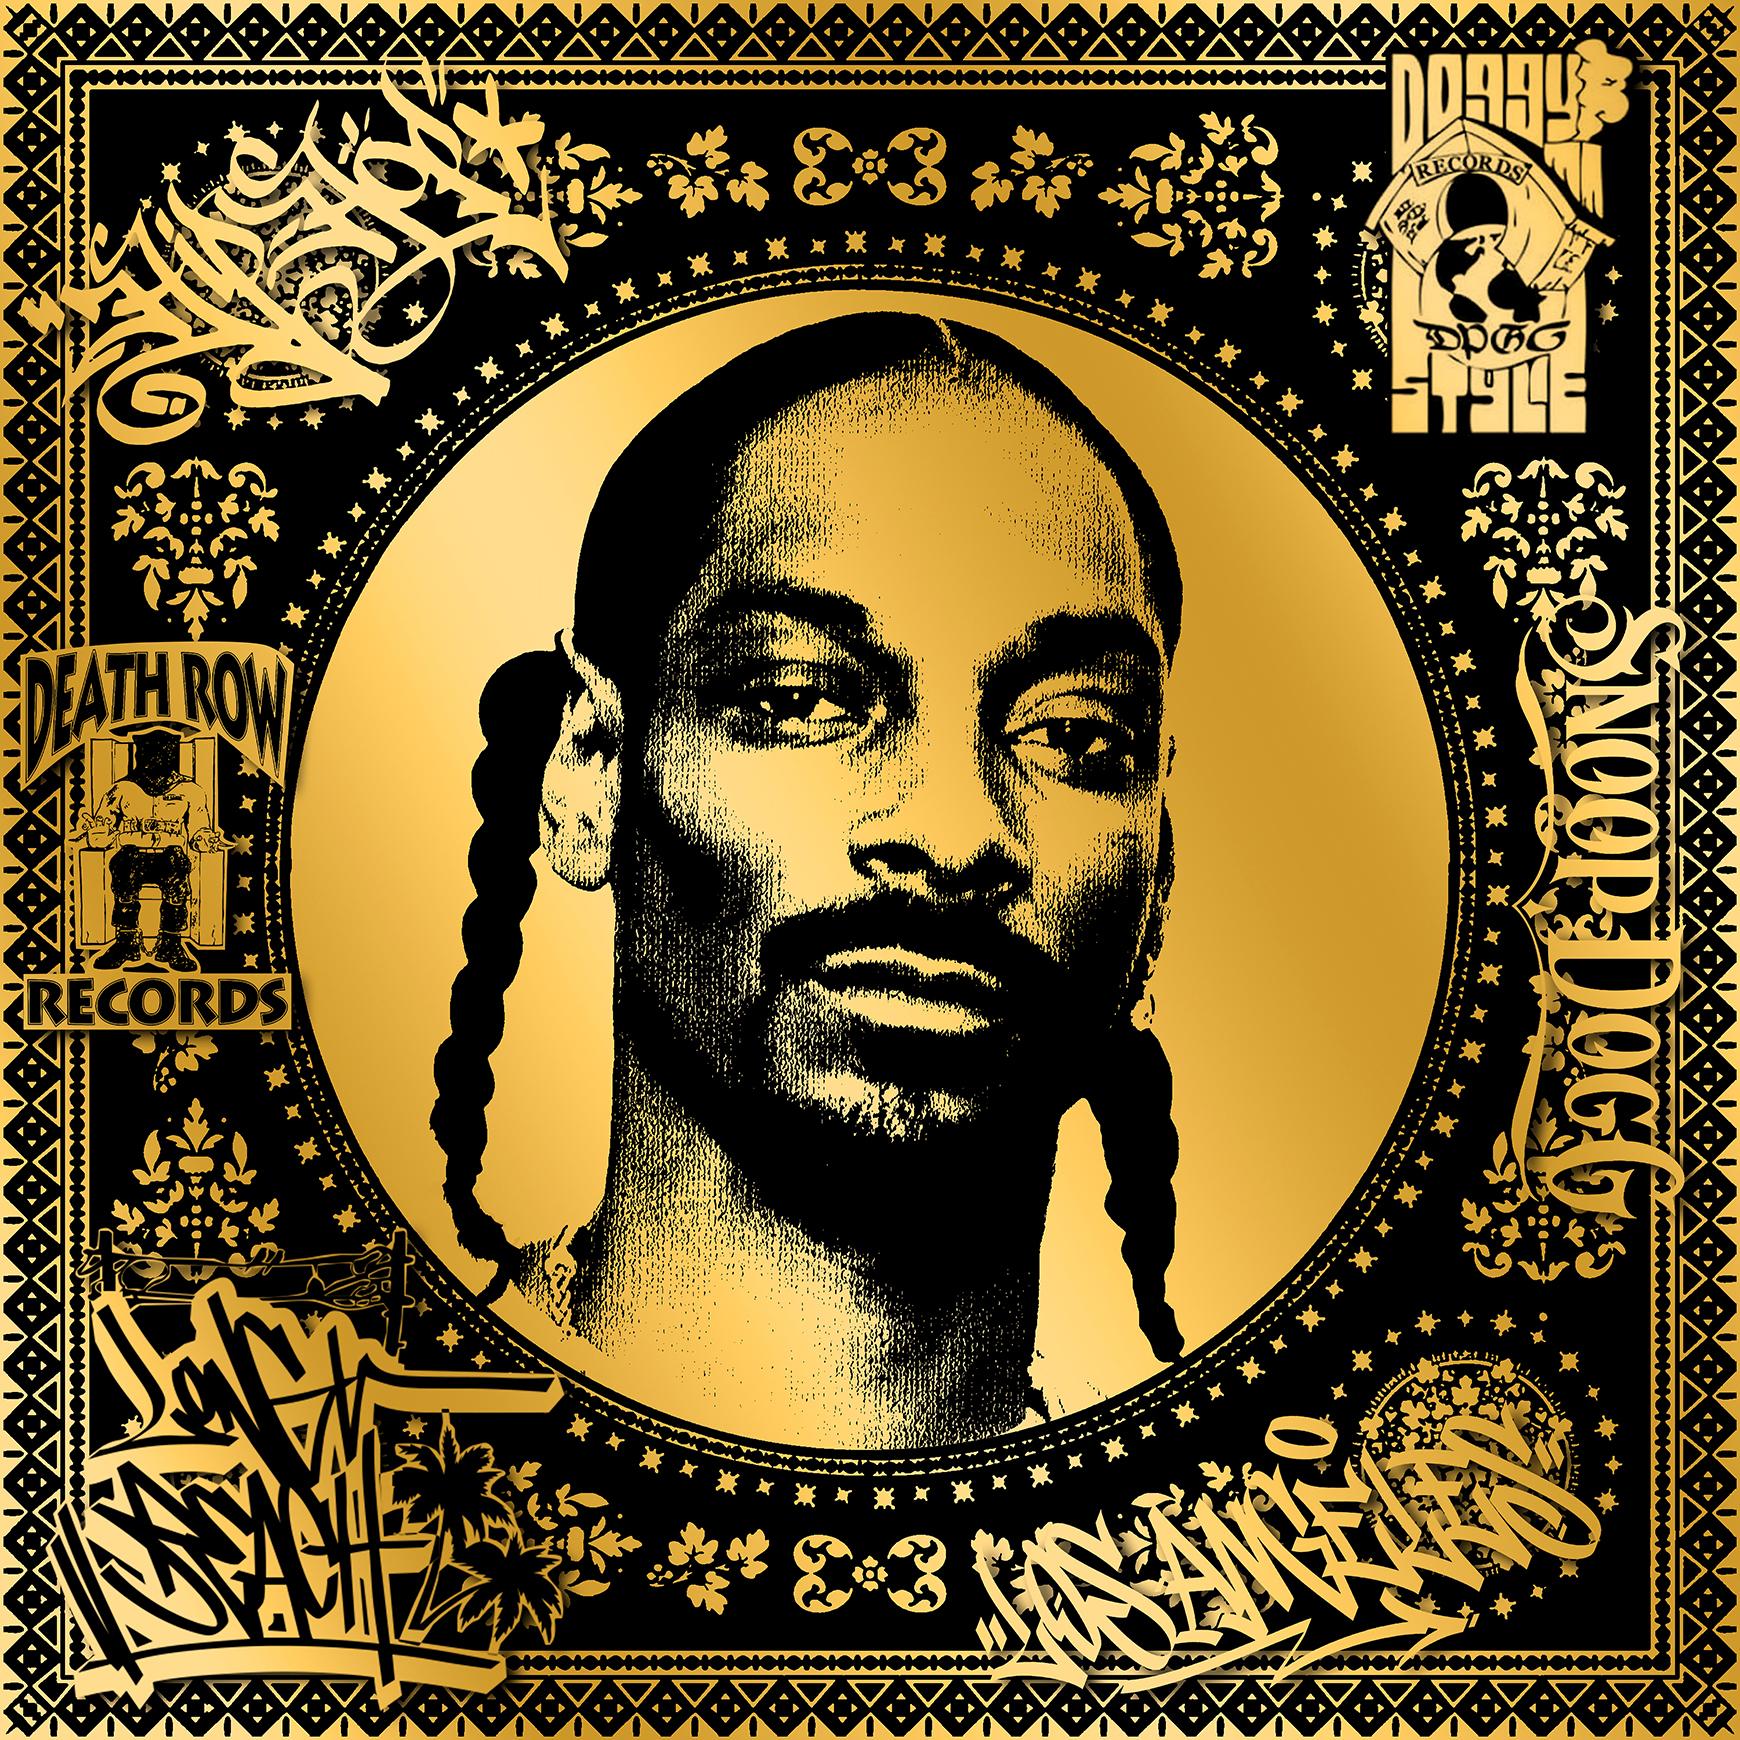 Snoop Dogg (Gold) (50 Years, Hip Hop, Rap, Iconic, Artist, Musician, Rapper) - Print by Agent X